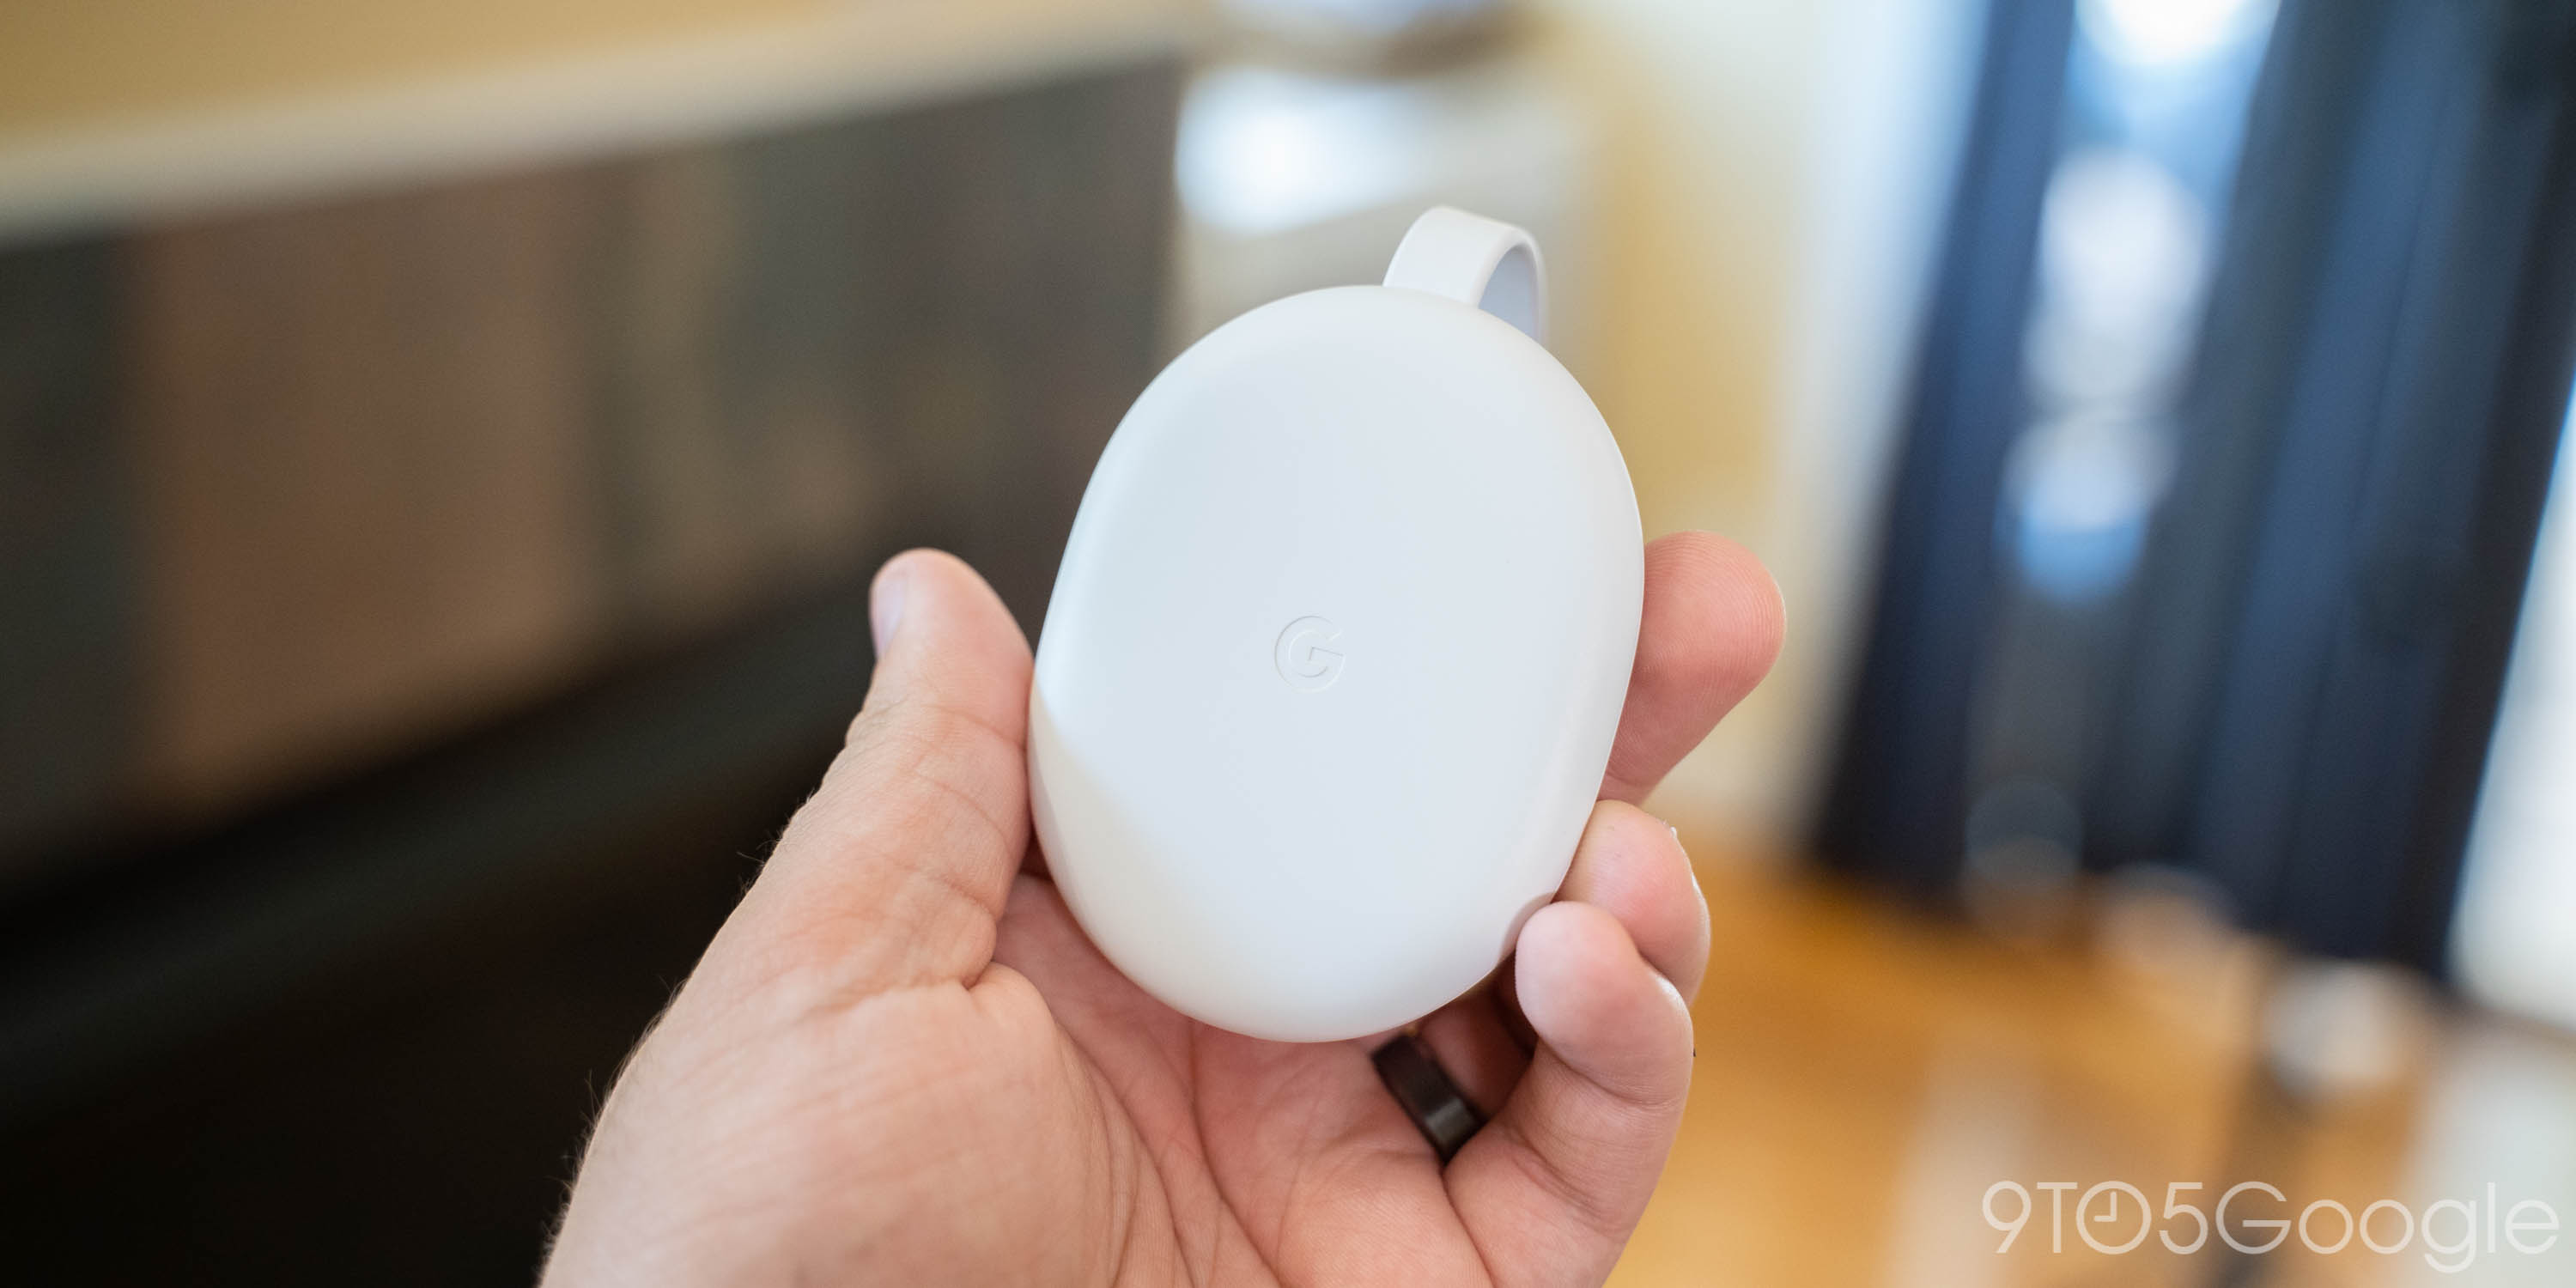 Google will sell an Ethernet adapter for its new Android TV-powered Chromecast - 9to5Google